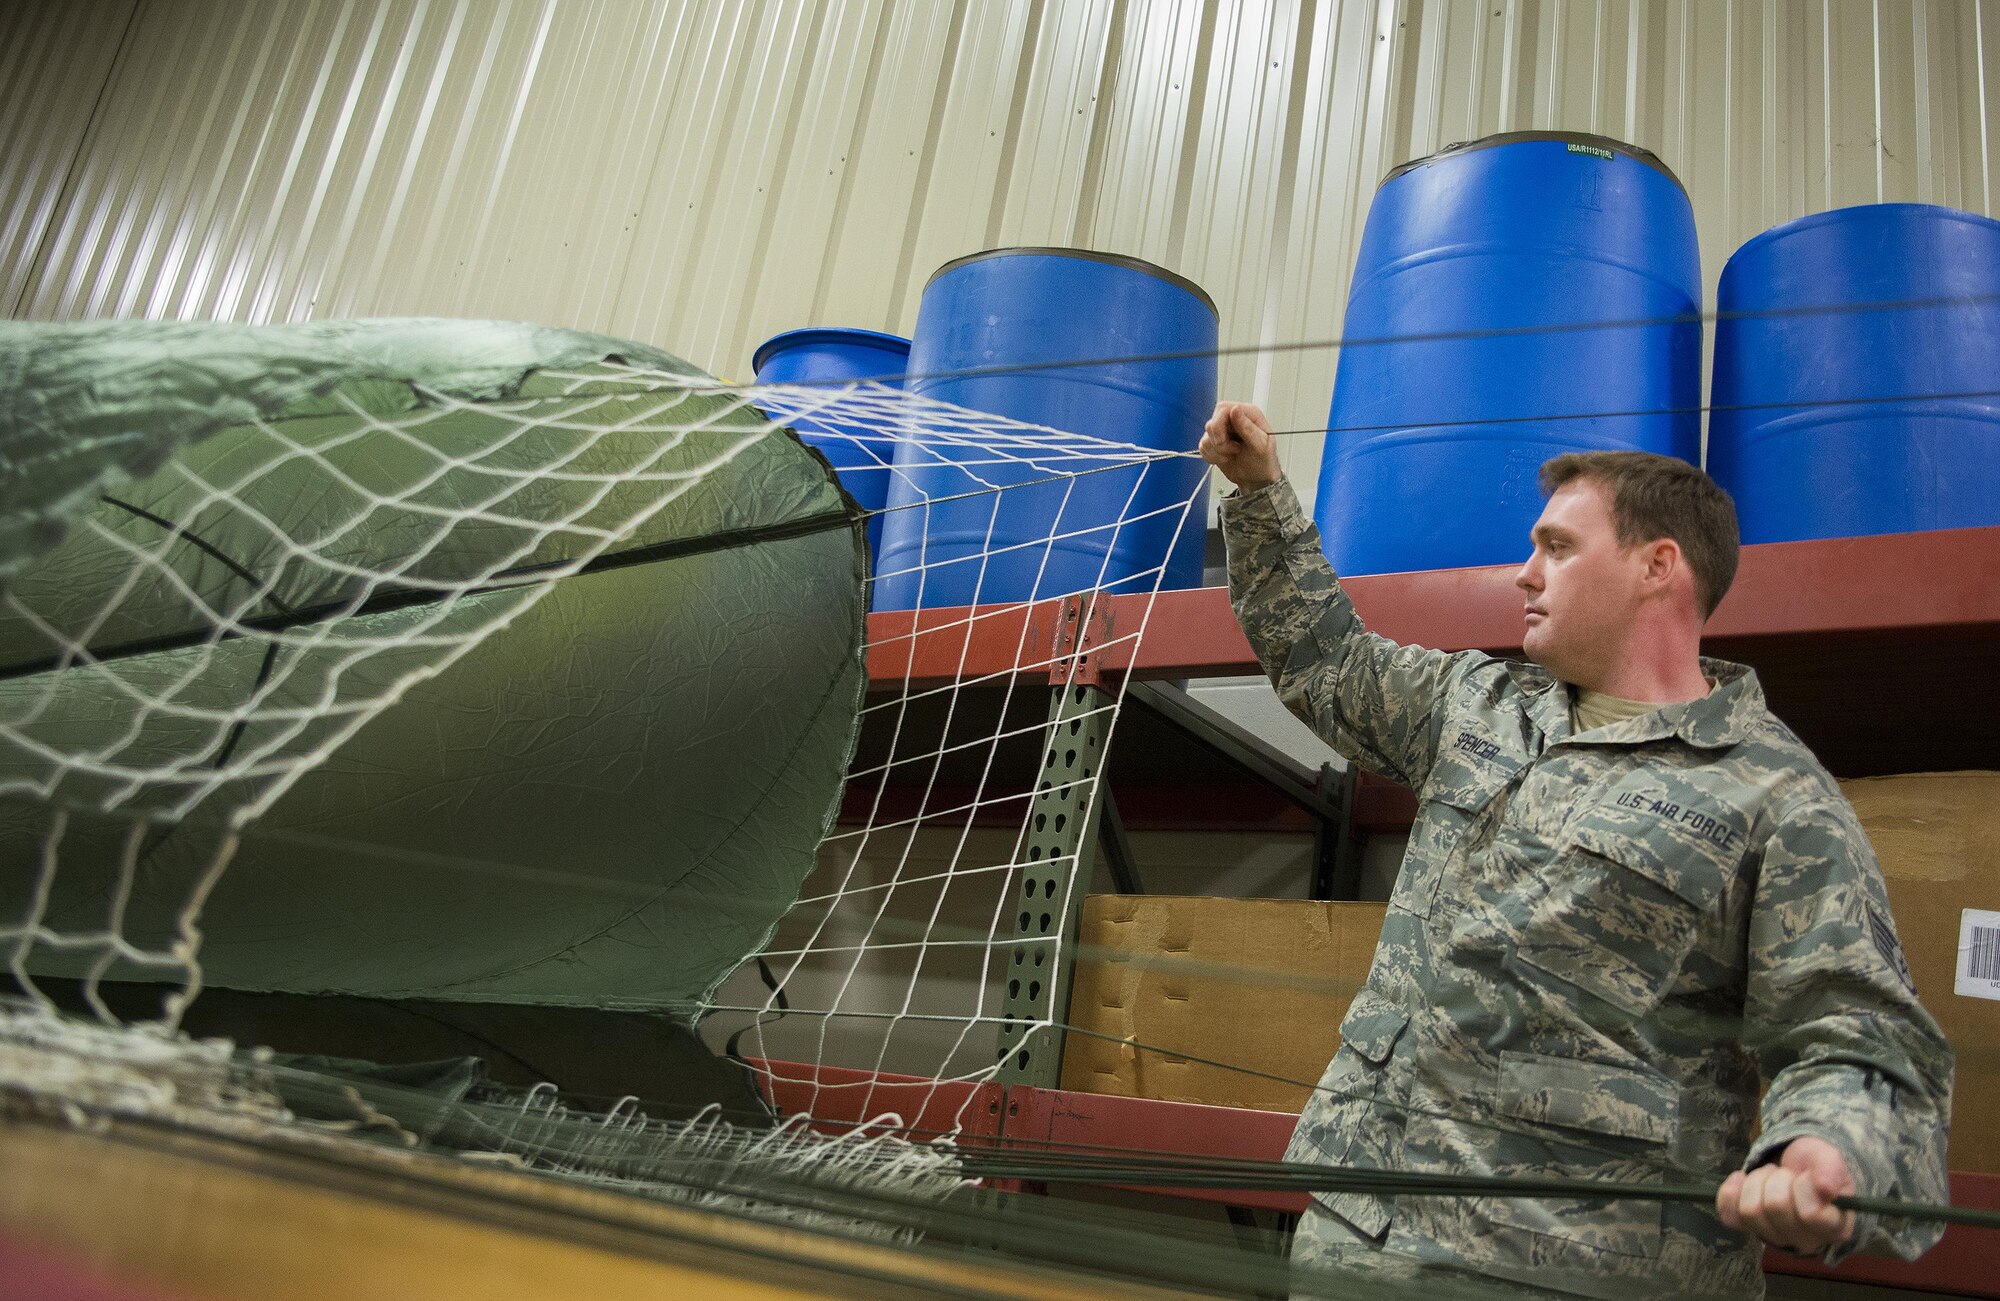 Staff Sgt. Justin Spencer, 919th Special Operations Logistics Readiness Squadron, sets up a parachute at Duke Field, Fla.  The parachutes are attached to 300-pound bundles and loaded onto aircraft so new loadmasters can perform their initial airdrop training and prior-qualified Airmen can maintain proficiency.  (U.S. Air Force photo/Sam King)  